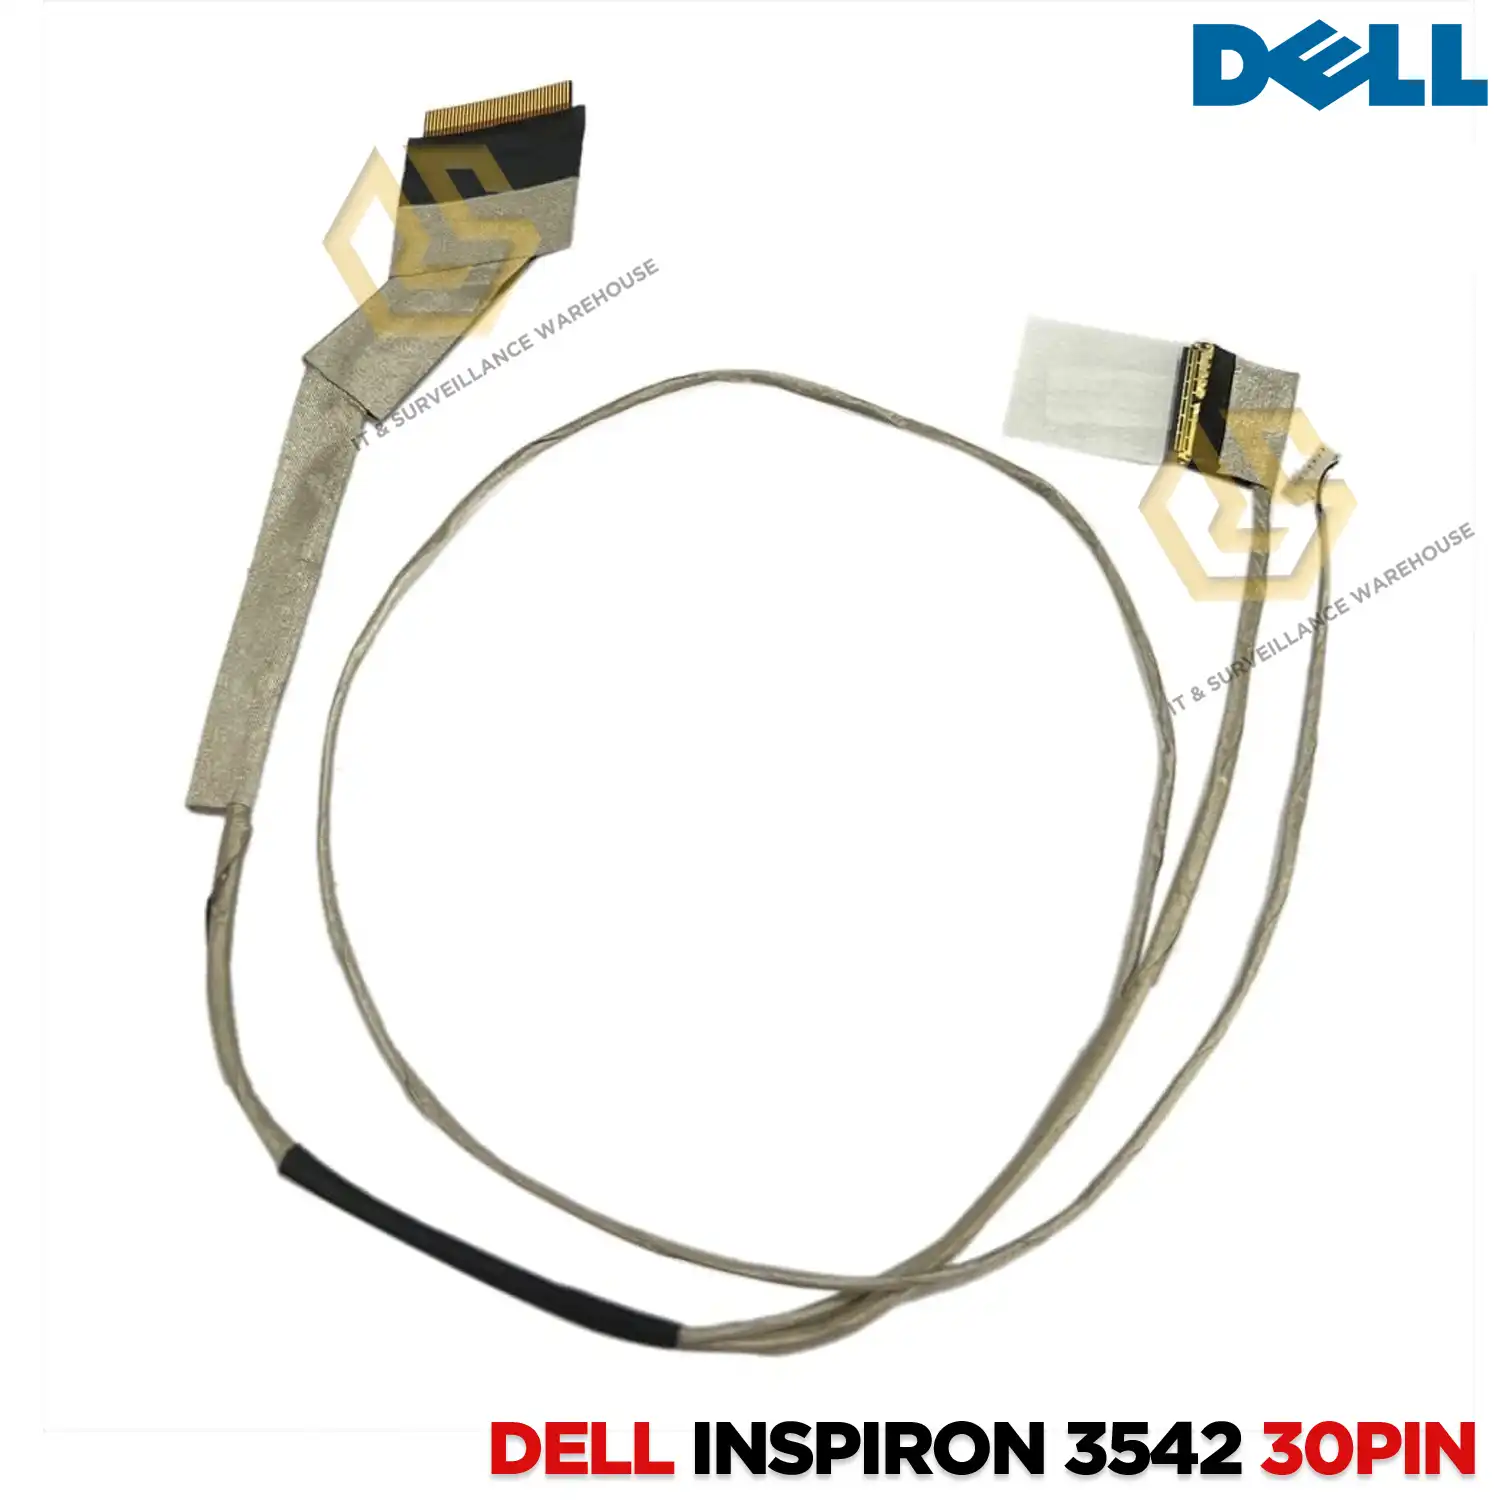 LAPTOP DISPLAY CABLE FOR DELL INSPIRON 3542 30PIN | 3541 | 5542 | 3452 | 3455